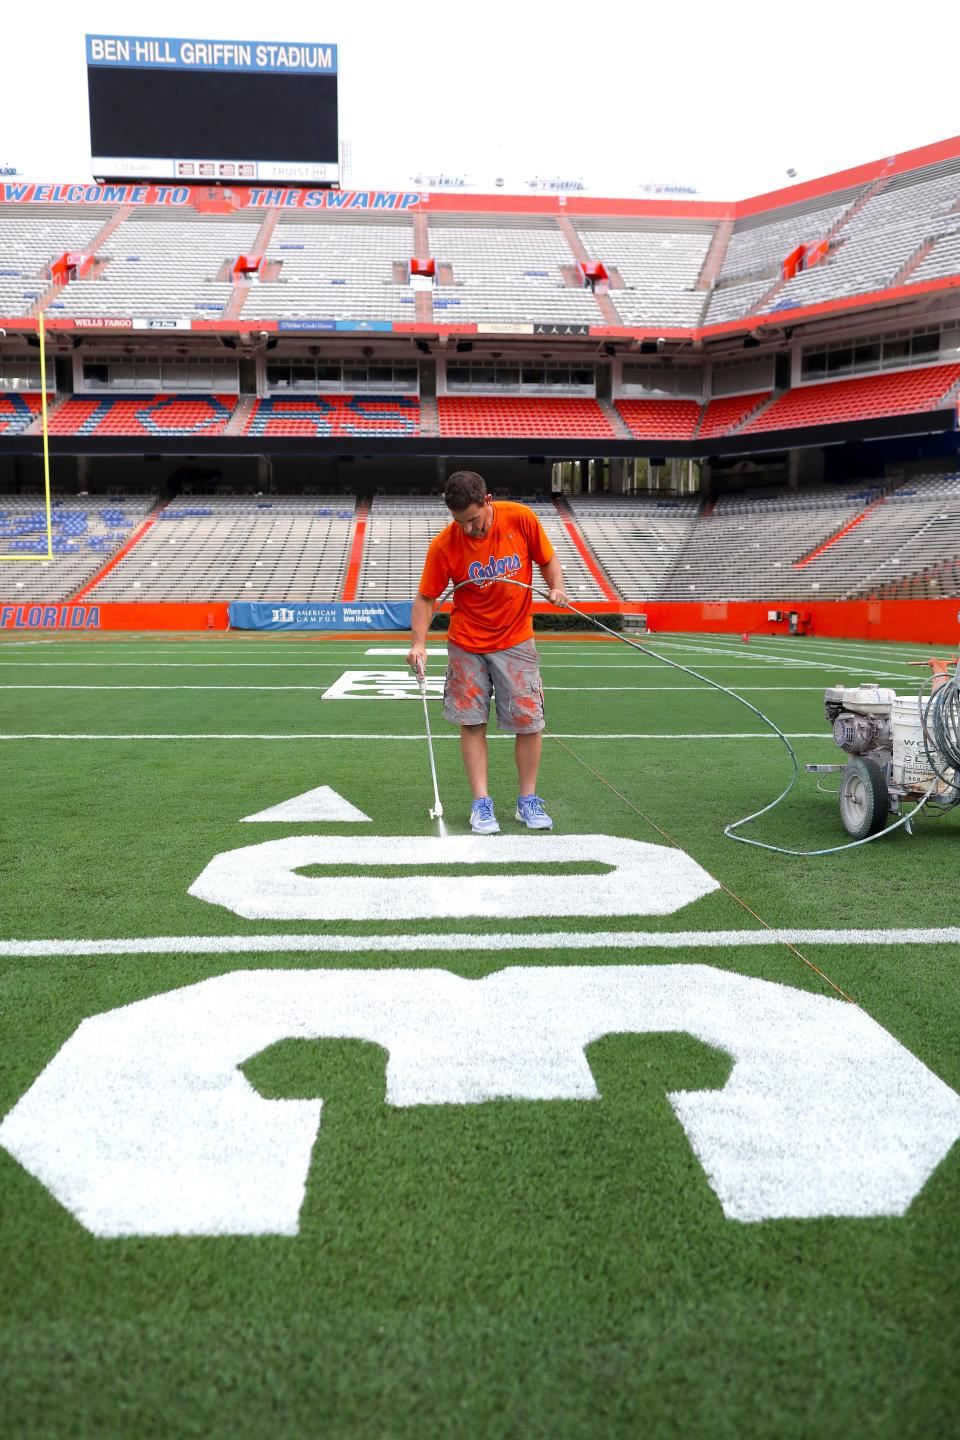 Jason Smith, the director of sports turf, paints the 30-yard logo on the field at Ben Hill Griffin Stadium as the crew prepares the field for the first game of the season, on the University of Florida campus in Gainesville FL. on Sept. 1, 2022. The Gators start the season Saturday against the No. 8 ranked Utah Utes.